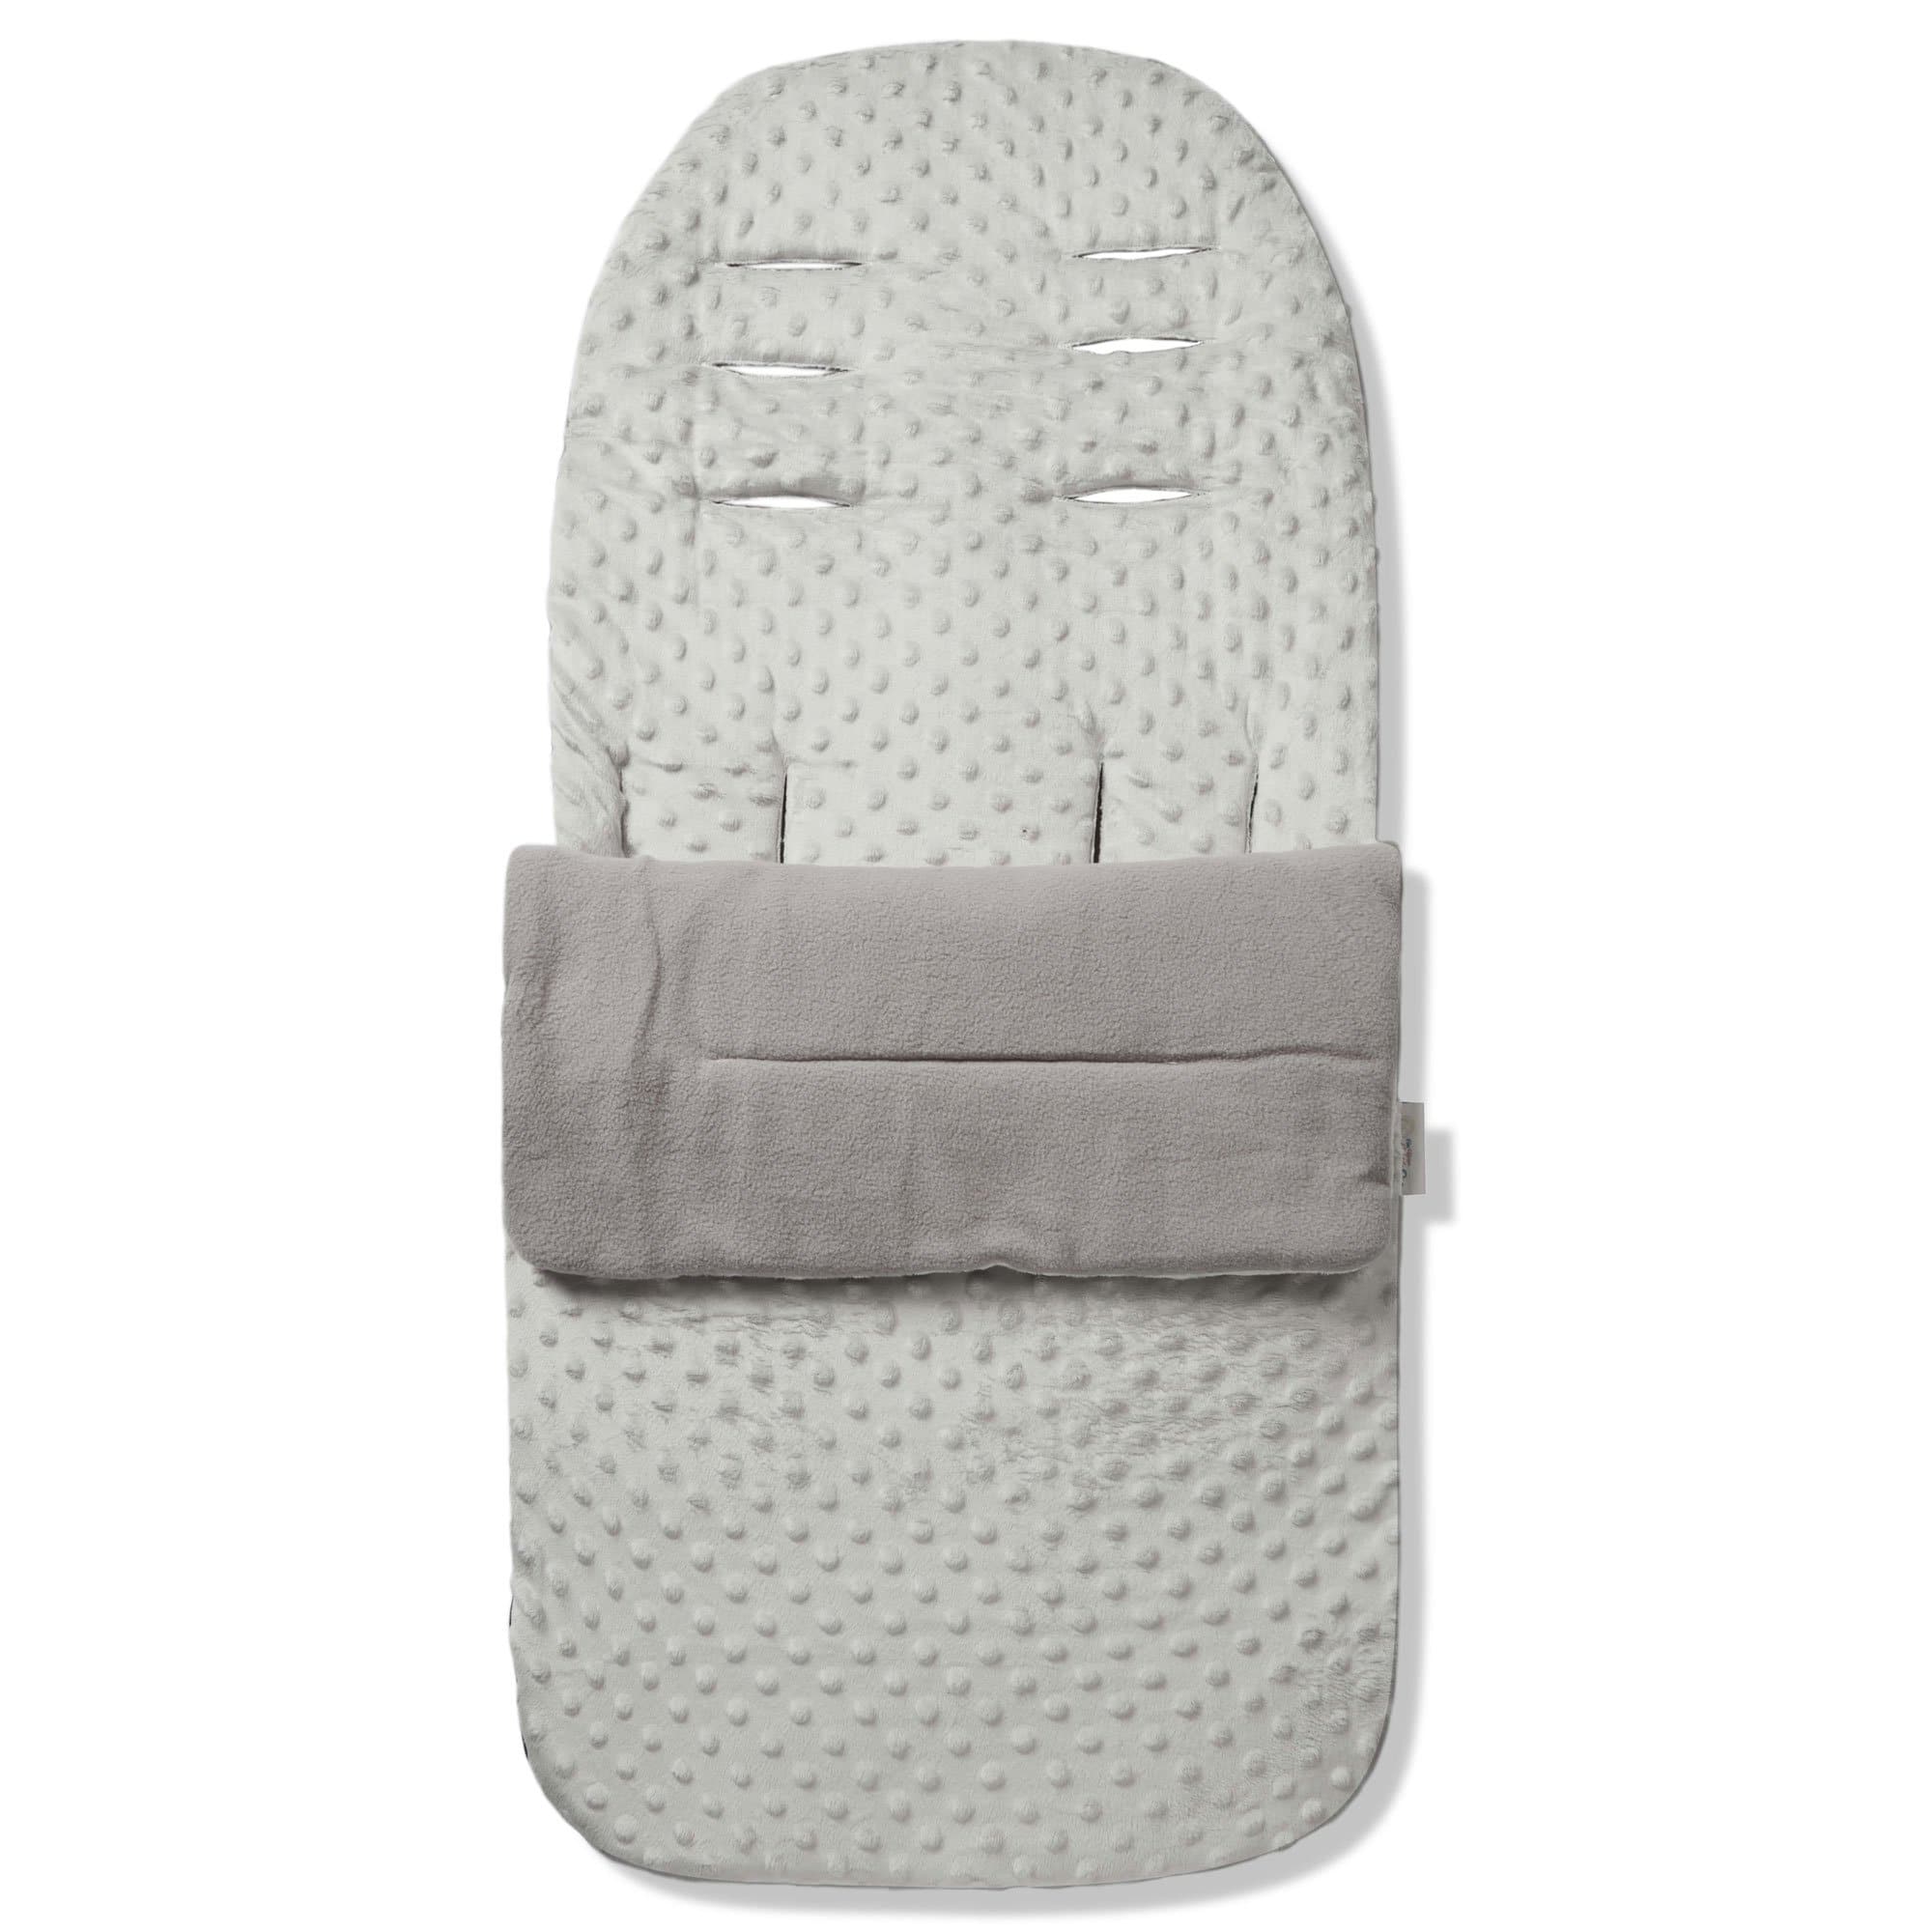 Dimple Footmuff / Cosy Toes Compatible with Bumbleride - For Your Little One